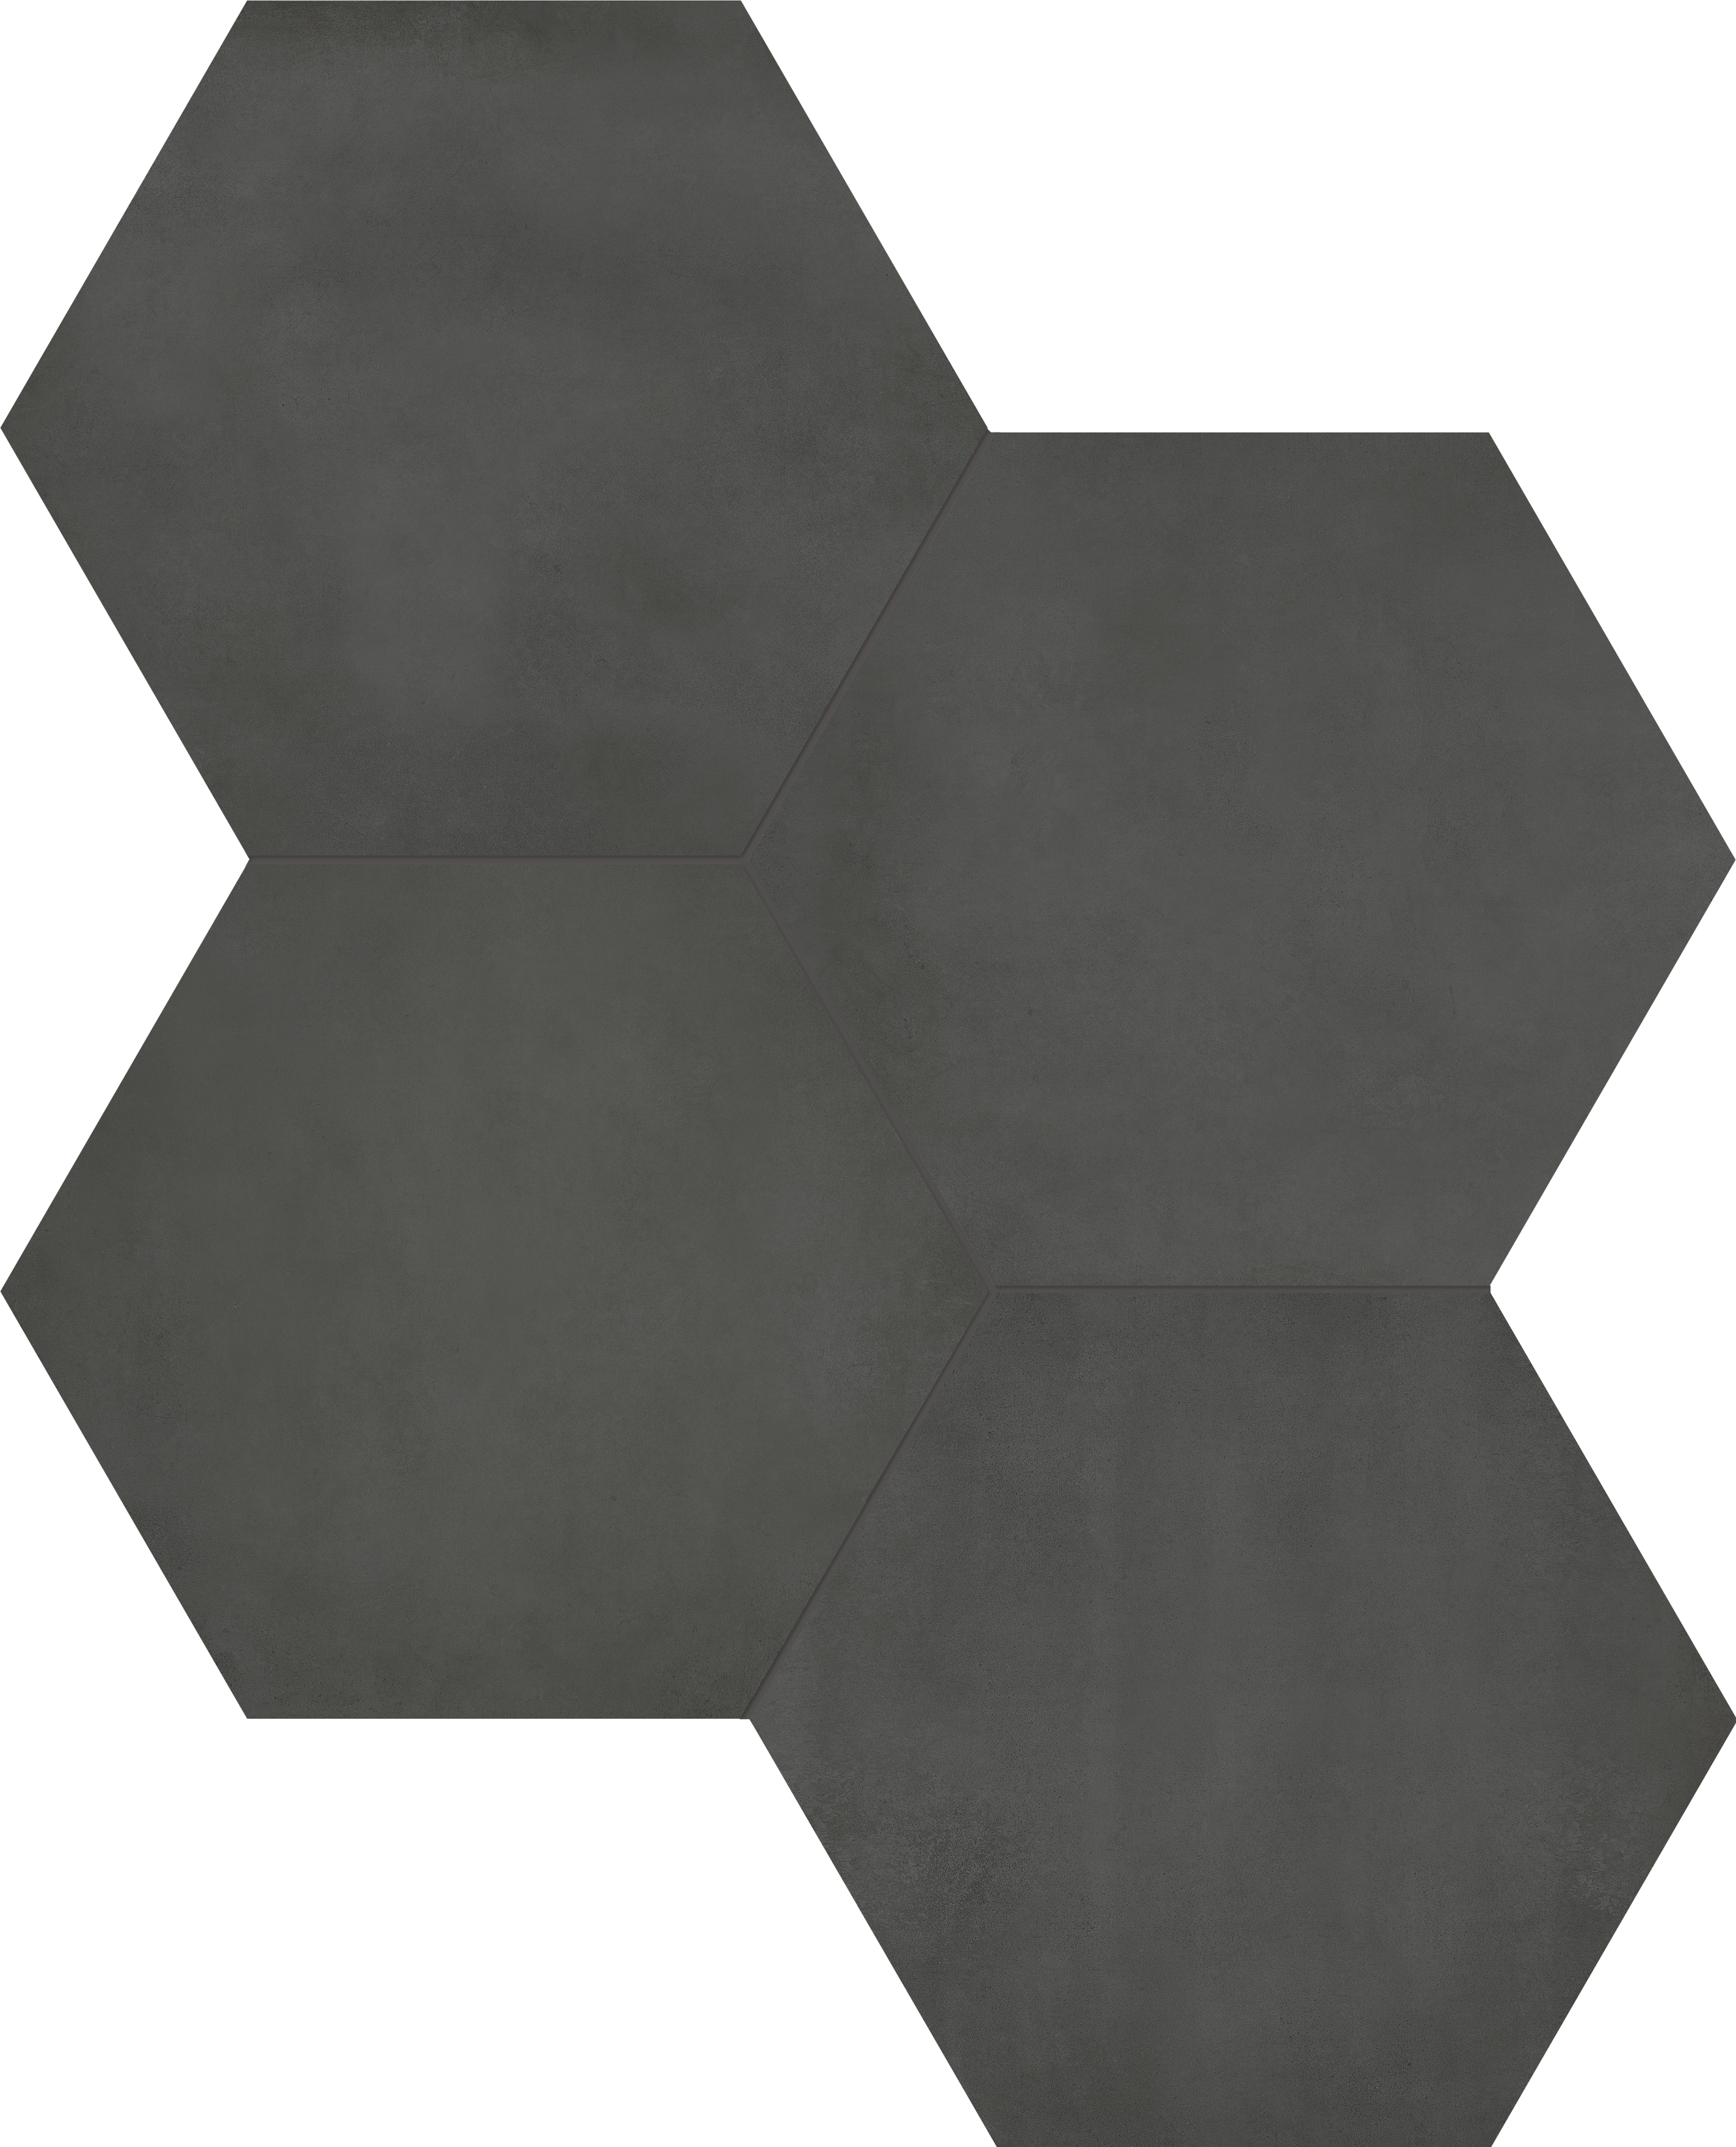 graphite pattern glazed porcelain field tile from form anatolia collection distributed by surface group international matte finish pressed edge 7-inch hexagon shape